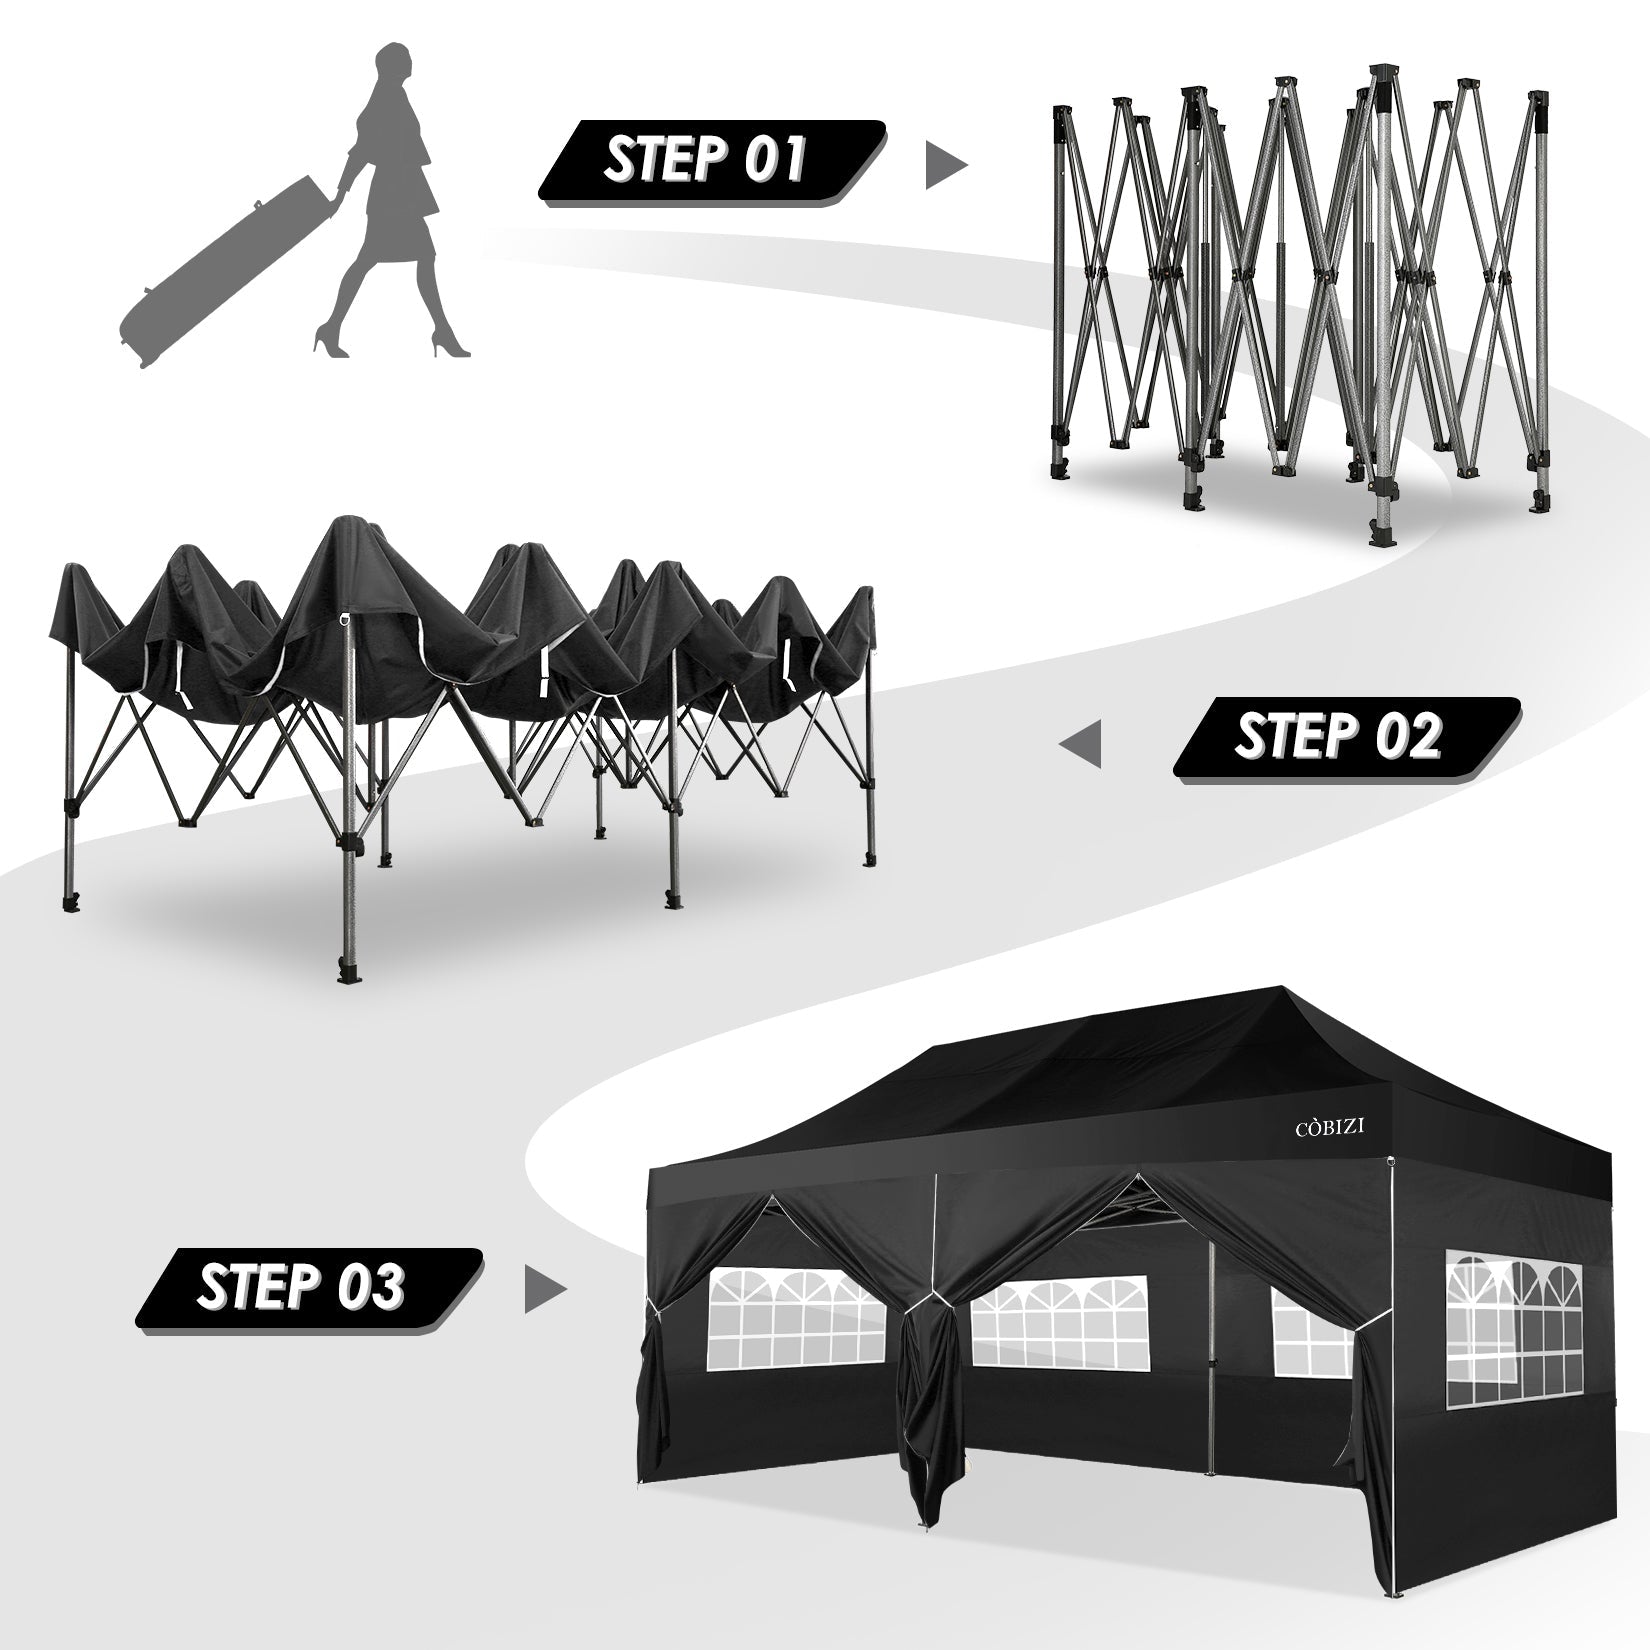 10'x20' Canopy EZ Pop Up Canopy Anti-UV Waterproof Outdoor Tent Portable Party Commercial Instant Canopy Shelter Height Adjustable Tent Gazebo with 6 Removable Sidewalls, 6 Sandbags, Roller Bag, Black